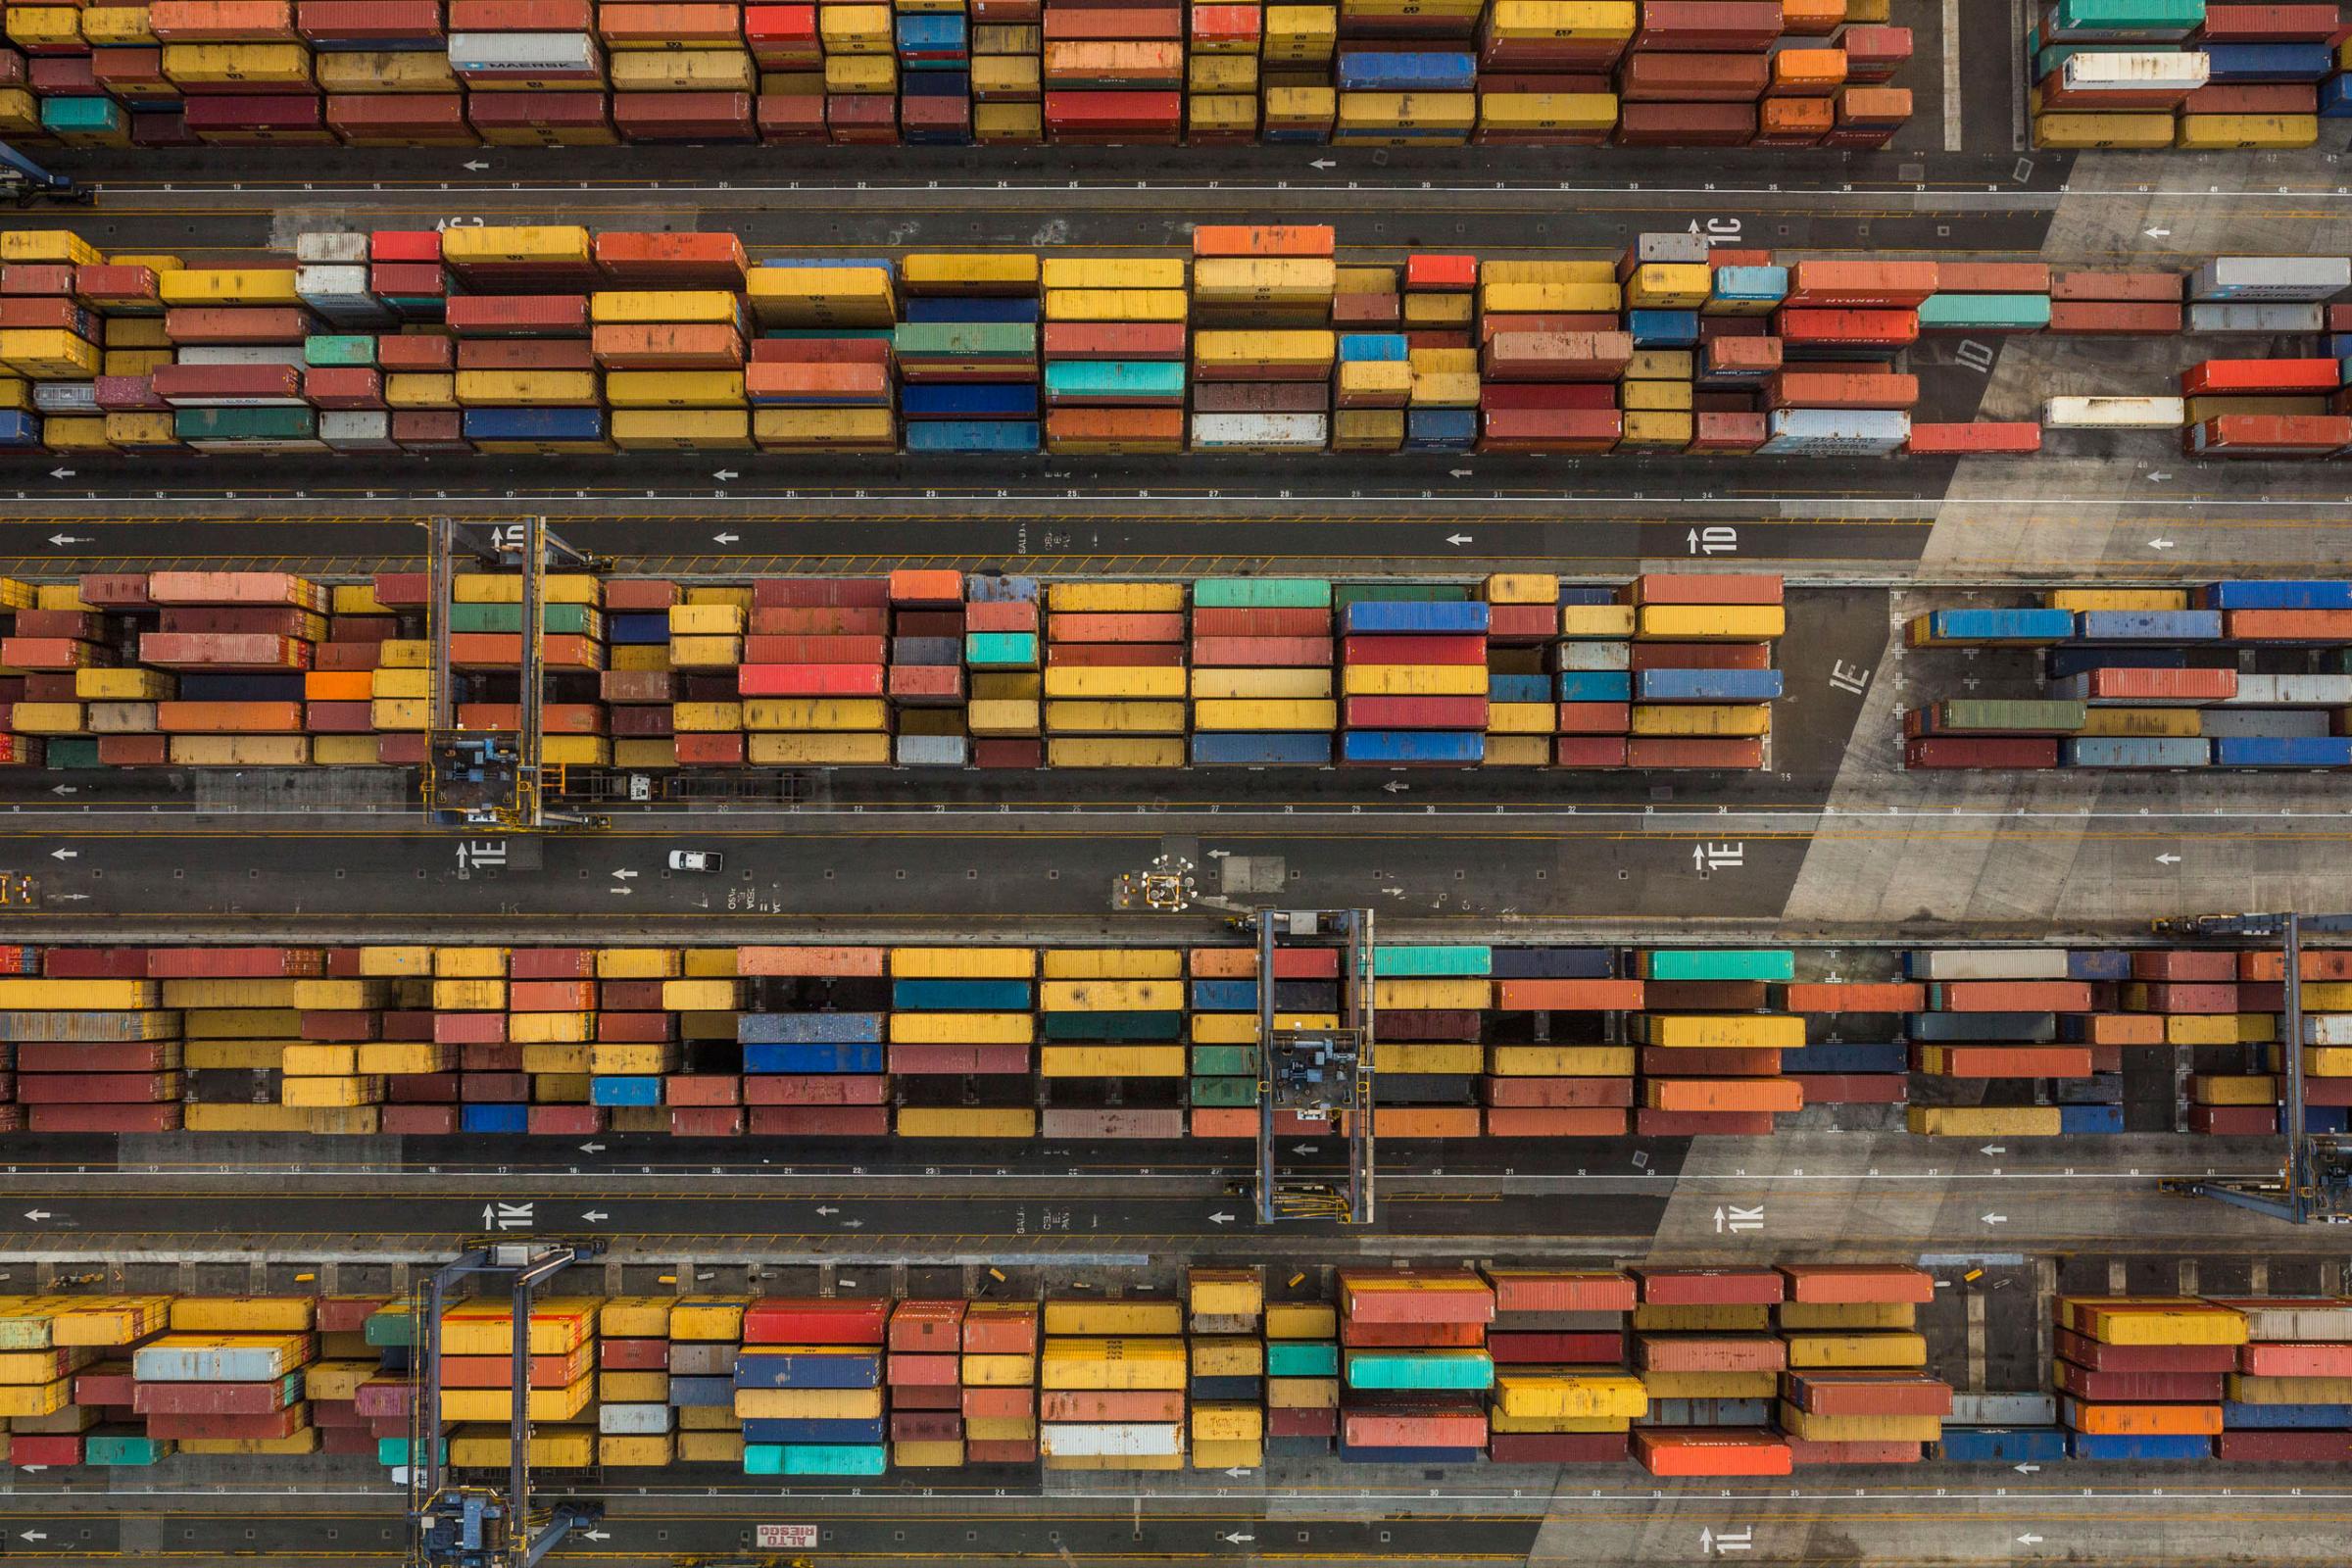 Container cargo yard on the Panama City side of the canal, where containers are transported by rail across the Isthmus of Panama. April, 22, 2015.